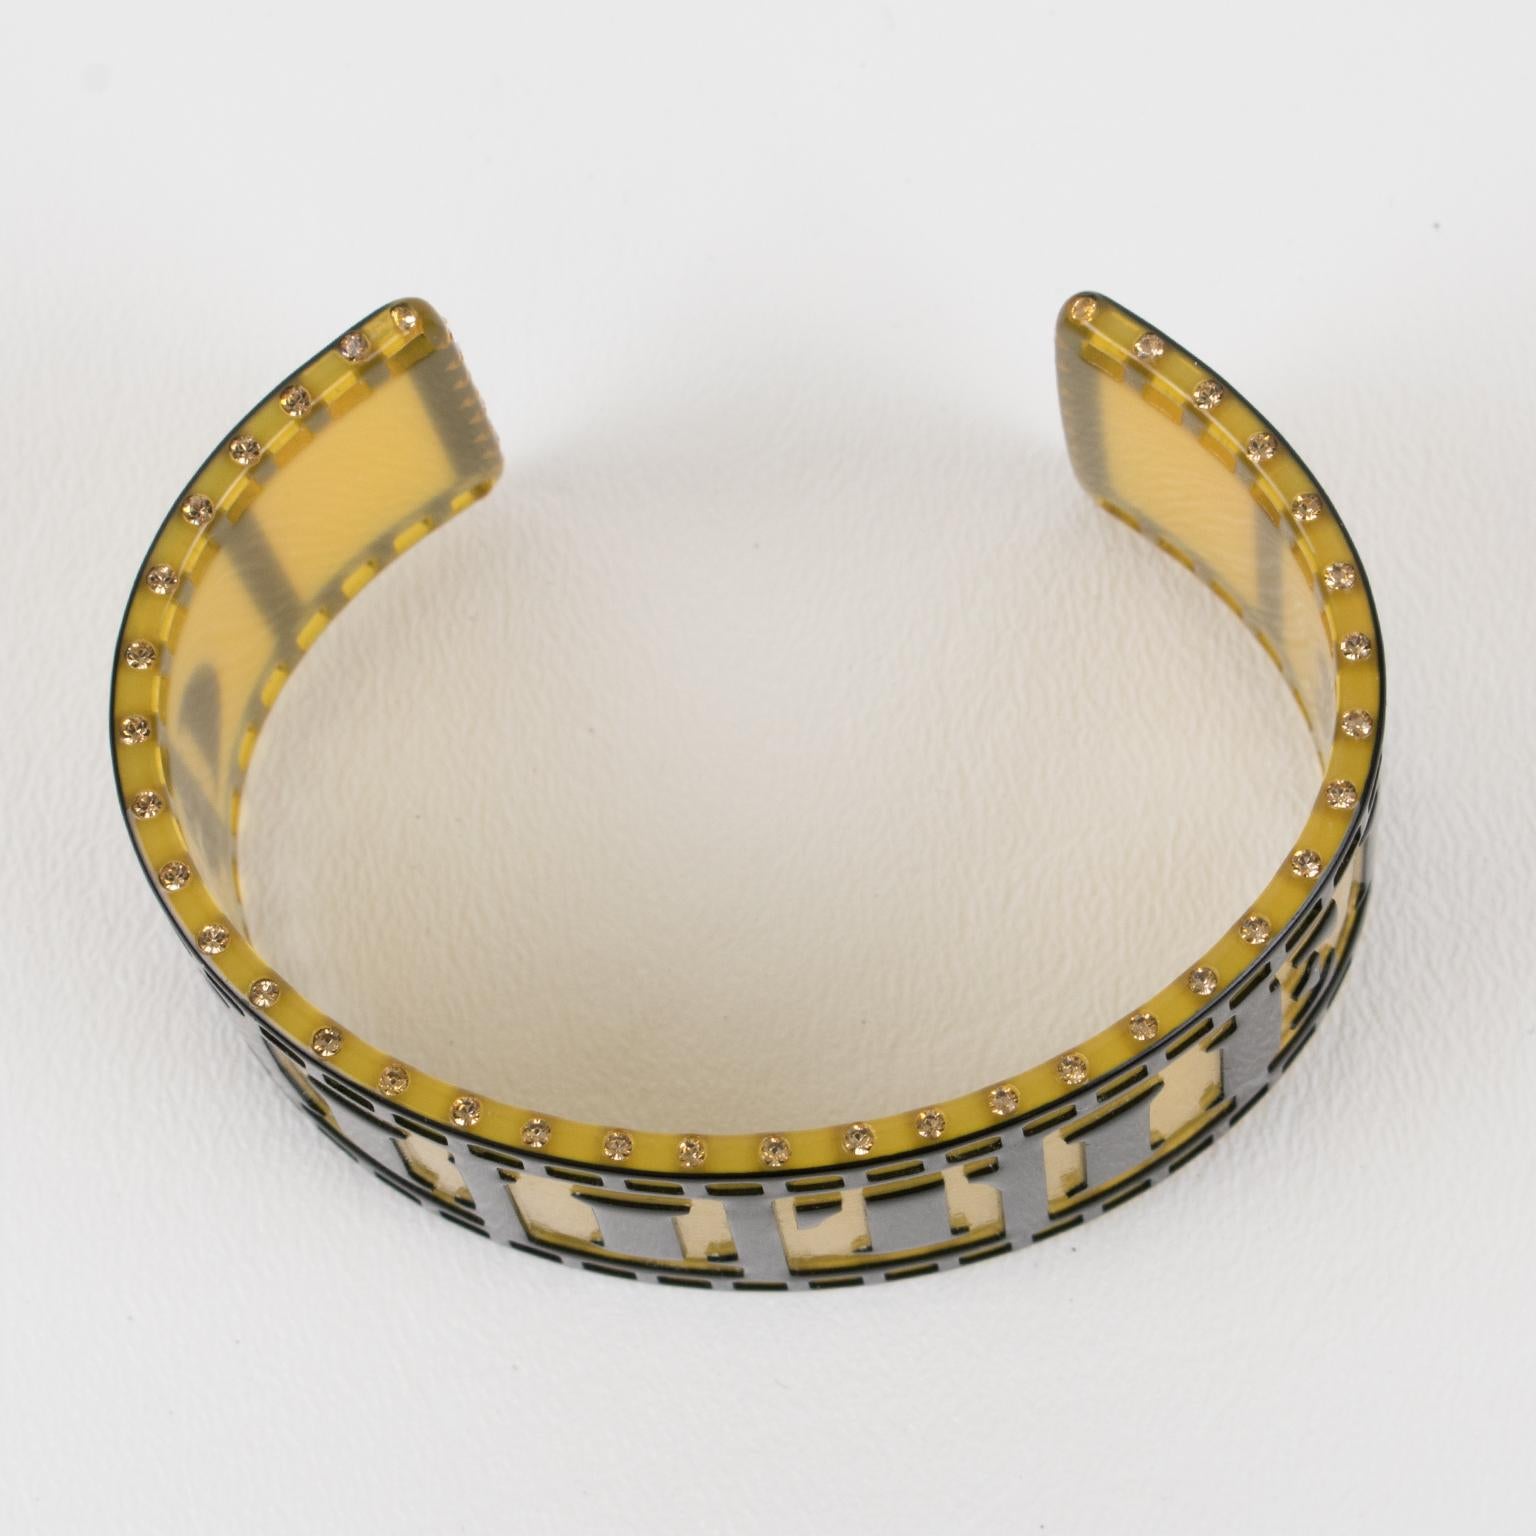 Jean Paul Gaultier Runway Black and Yellow Resin Cuff Bracelet Old Film Strip For Sale 5